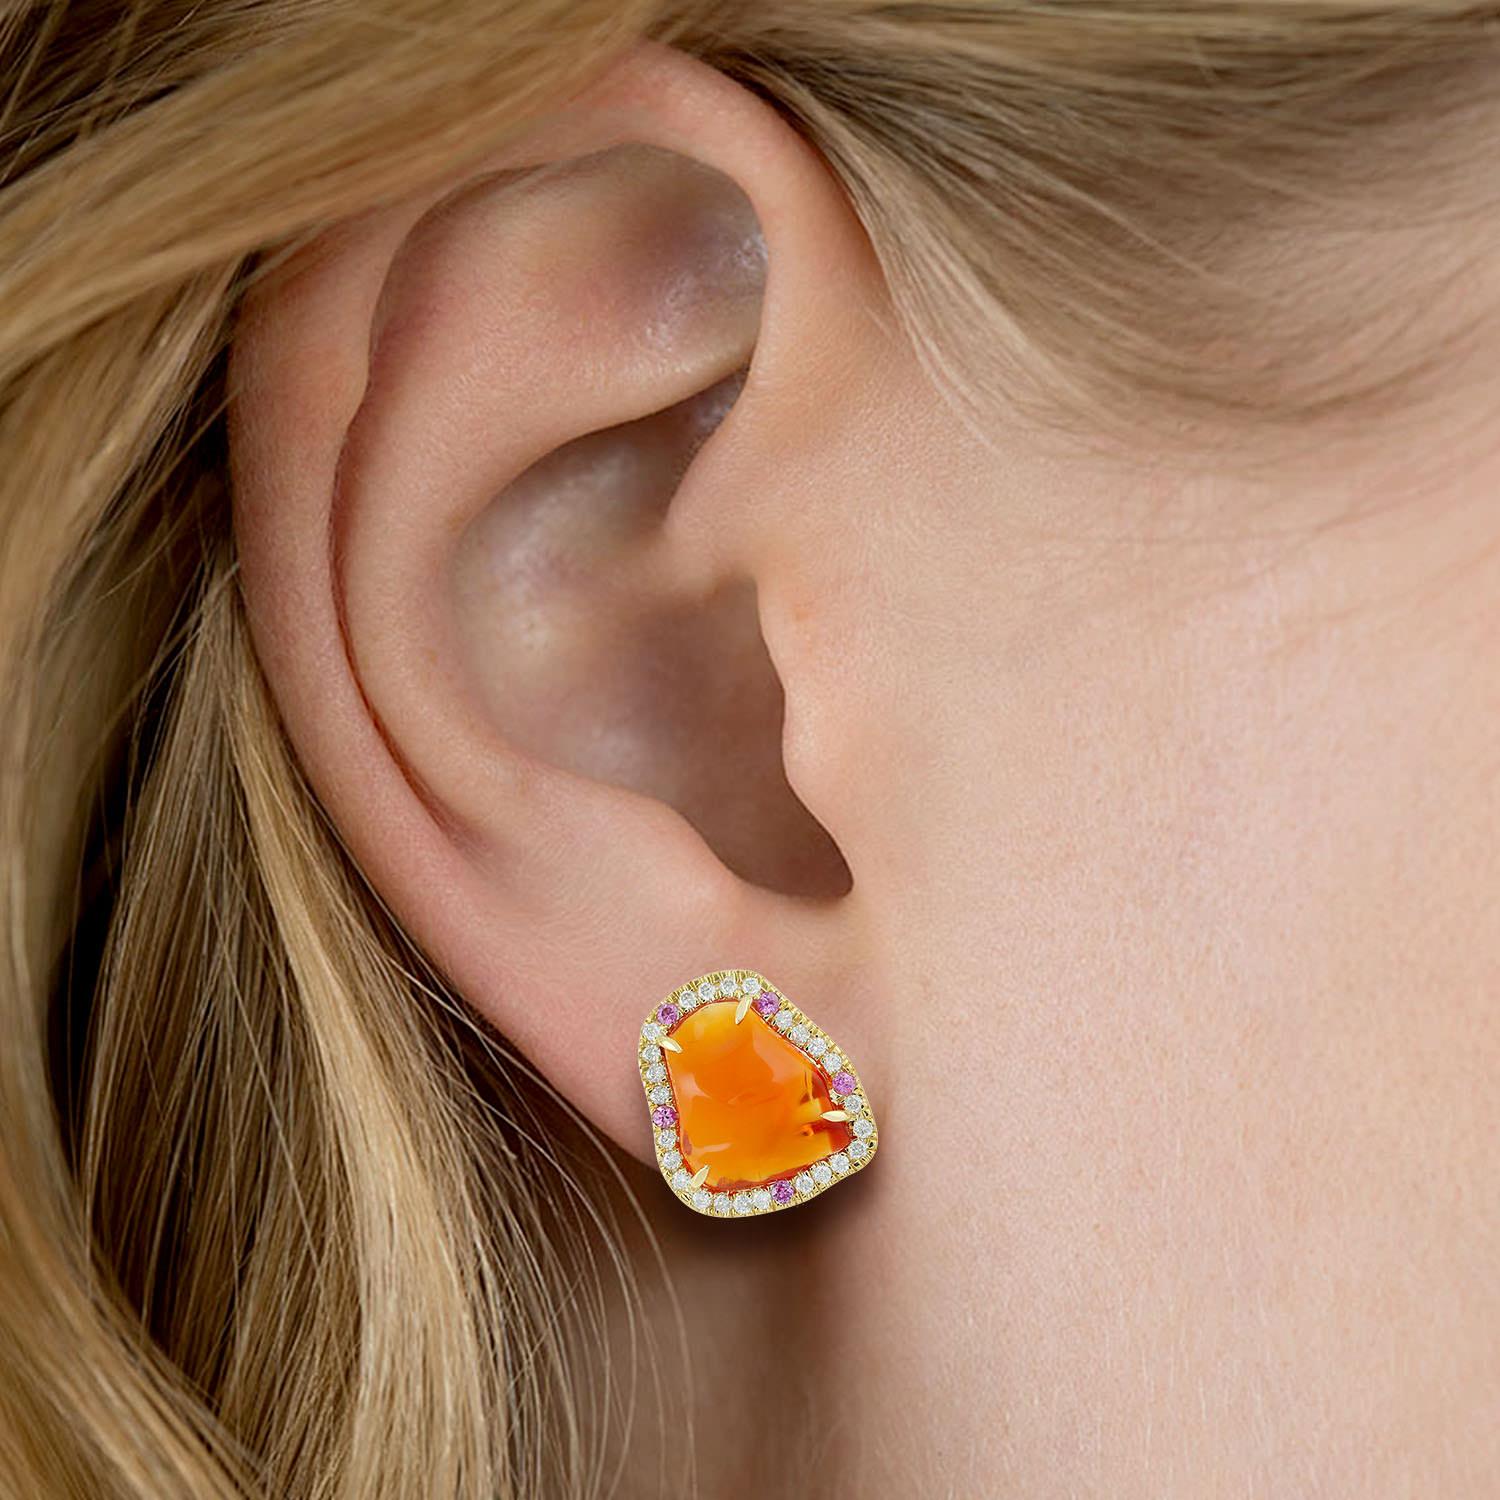 Cast in 18 karat gold. These stunning stud earrings are hand set in 5.46 carats fire opal, .14 carats sapphire and .35 carats of sparkling diamonds.

FOLLOW  MEGHNA JEWELS storefront to view the latest collection & exclusive pieces.  Meghna Jewels